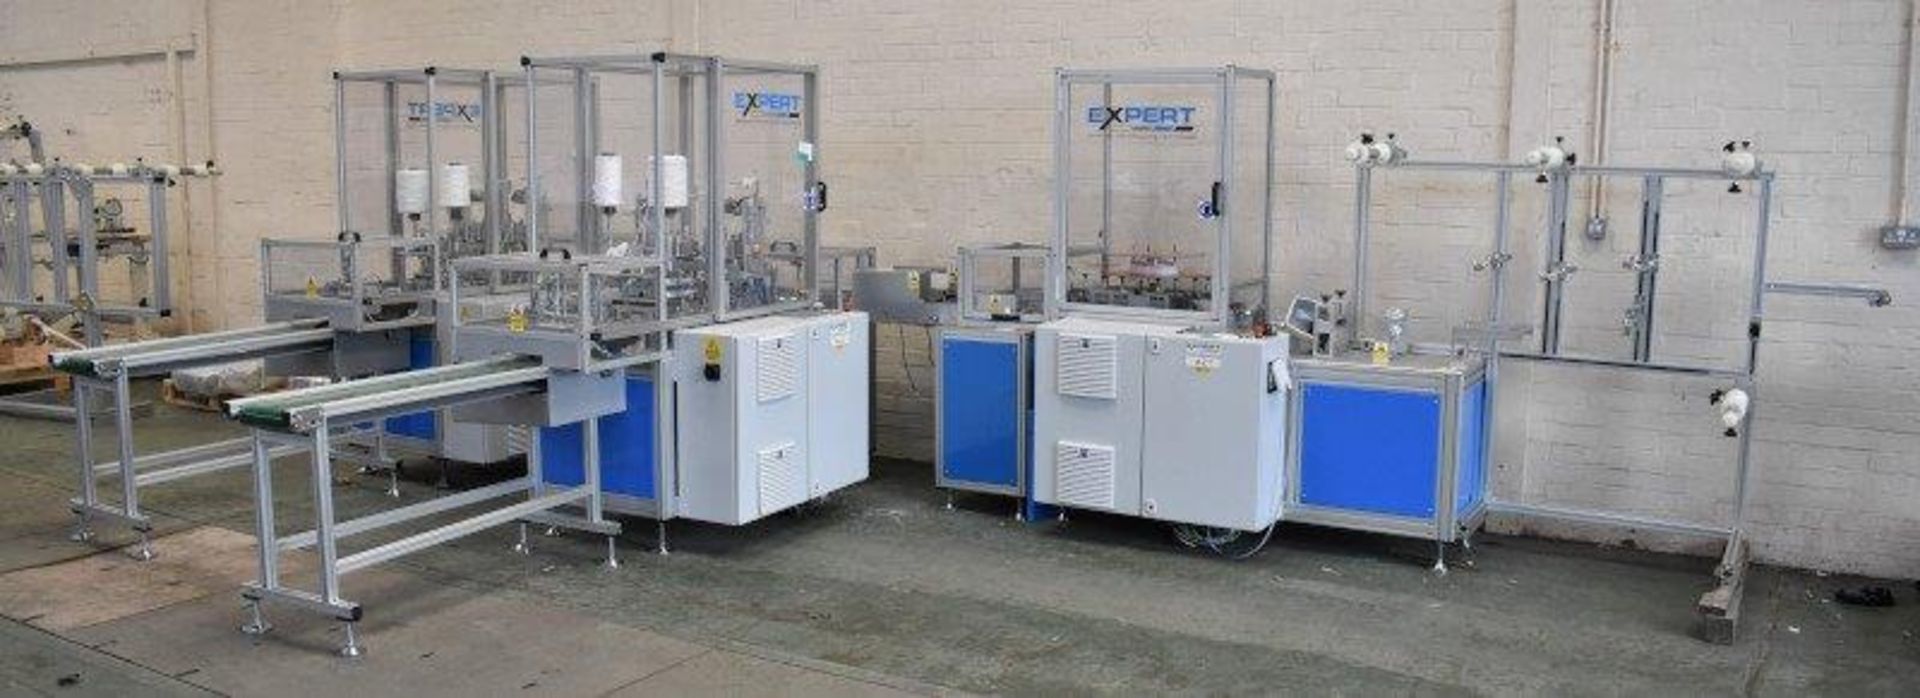 Expert fully automated Mask Making Machine - manufactured in 2020 - Image 2 of 20